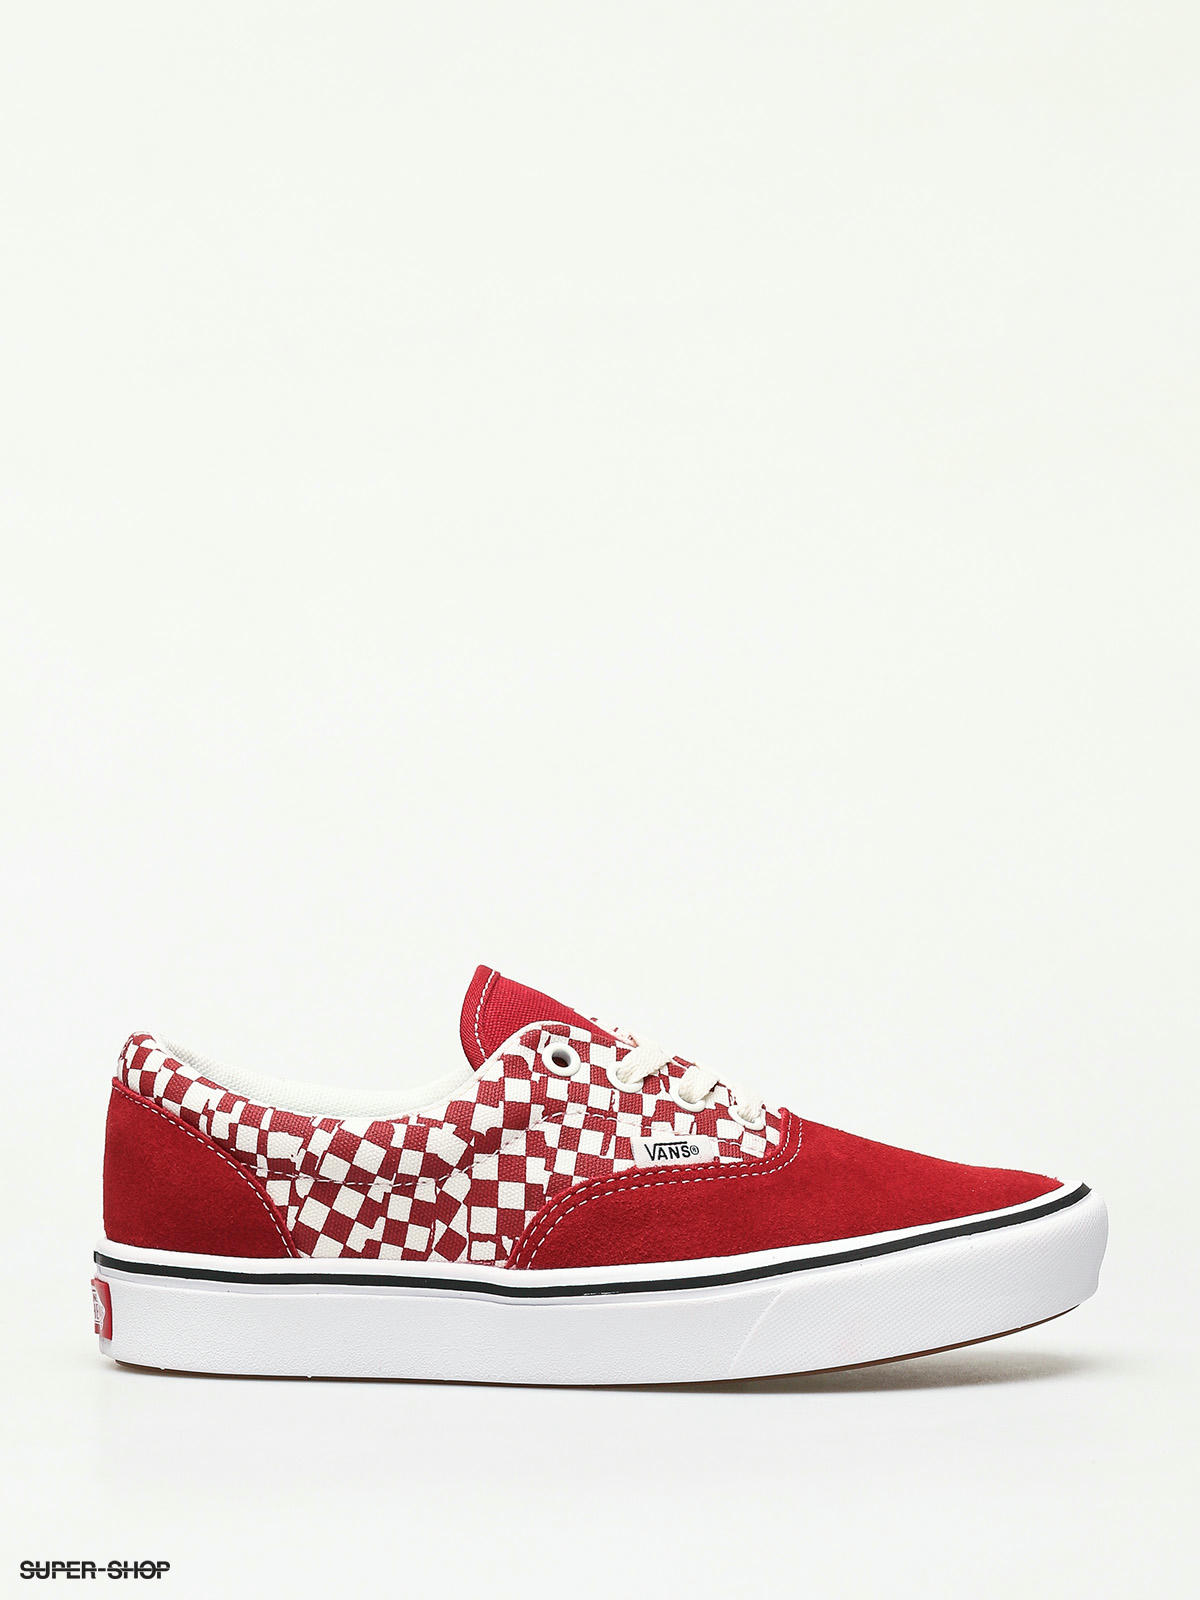 red and white vans shoes